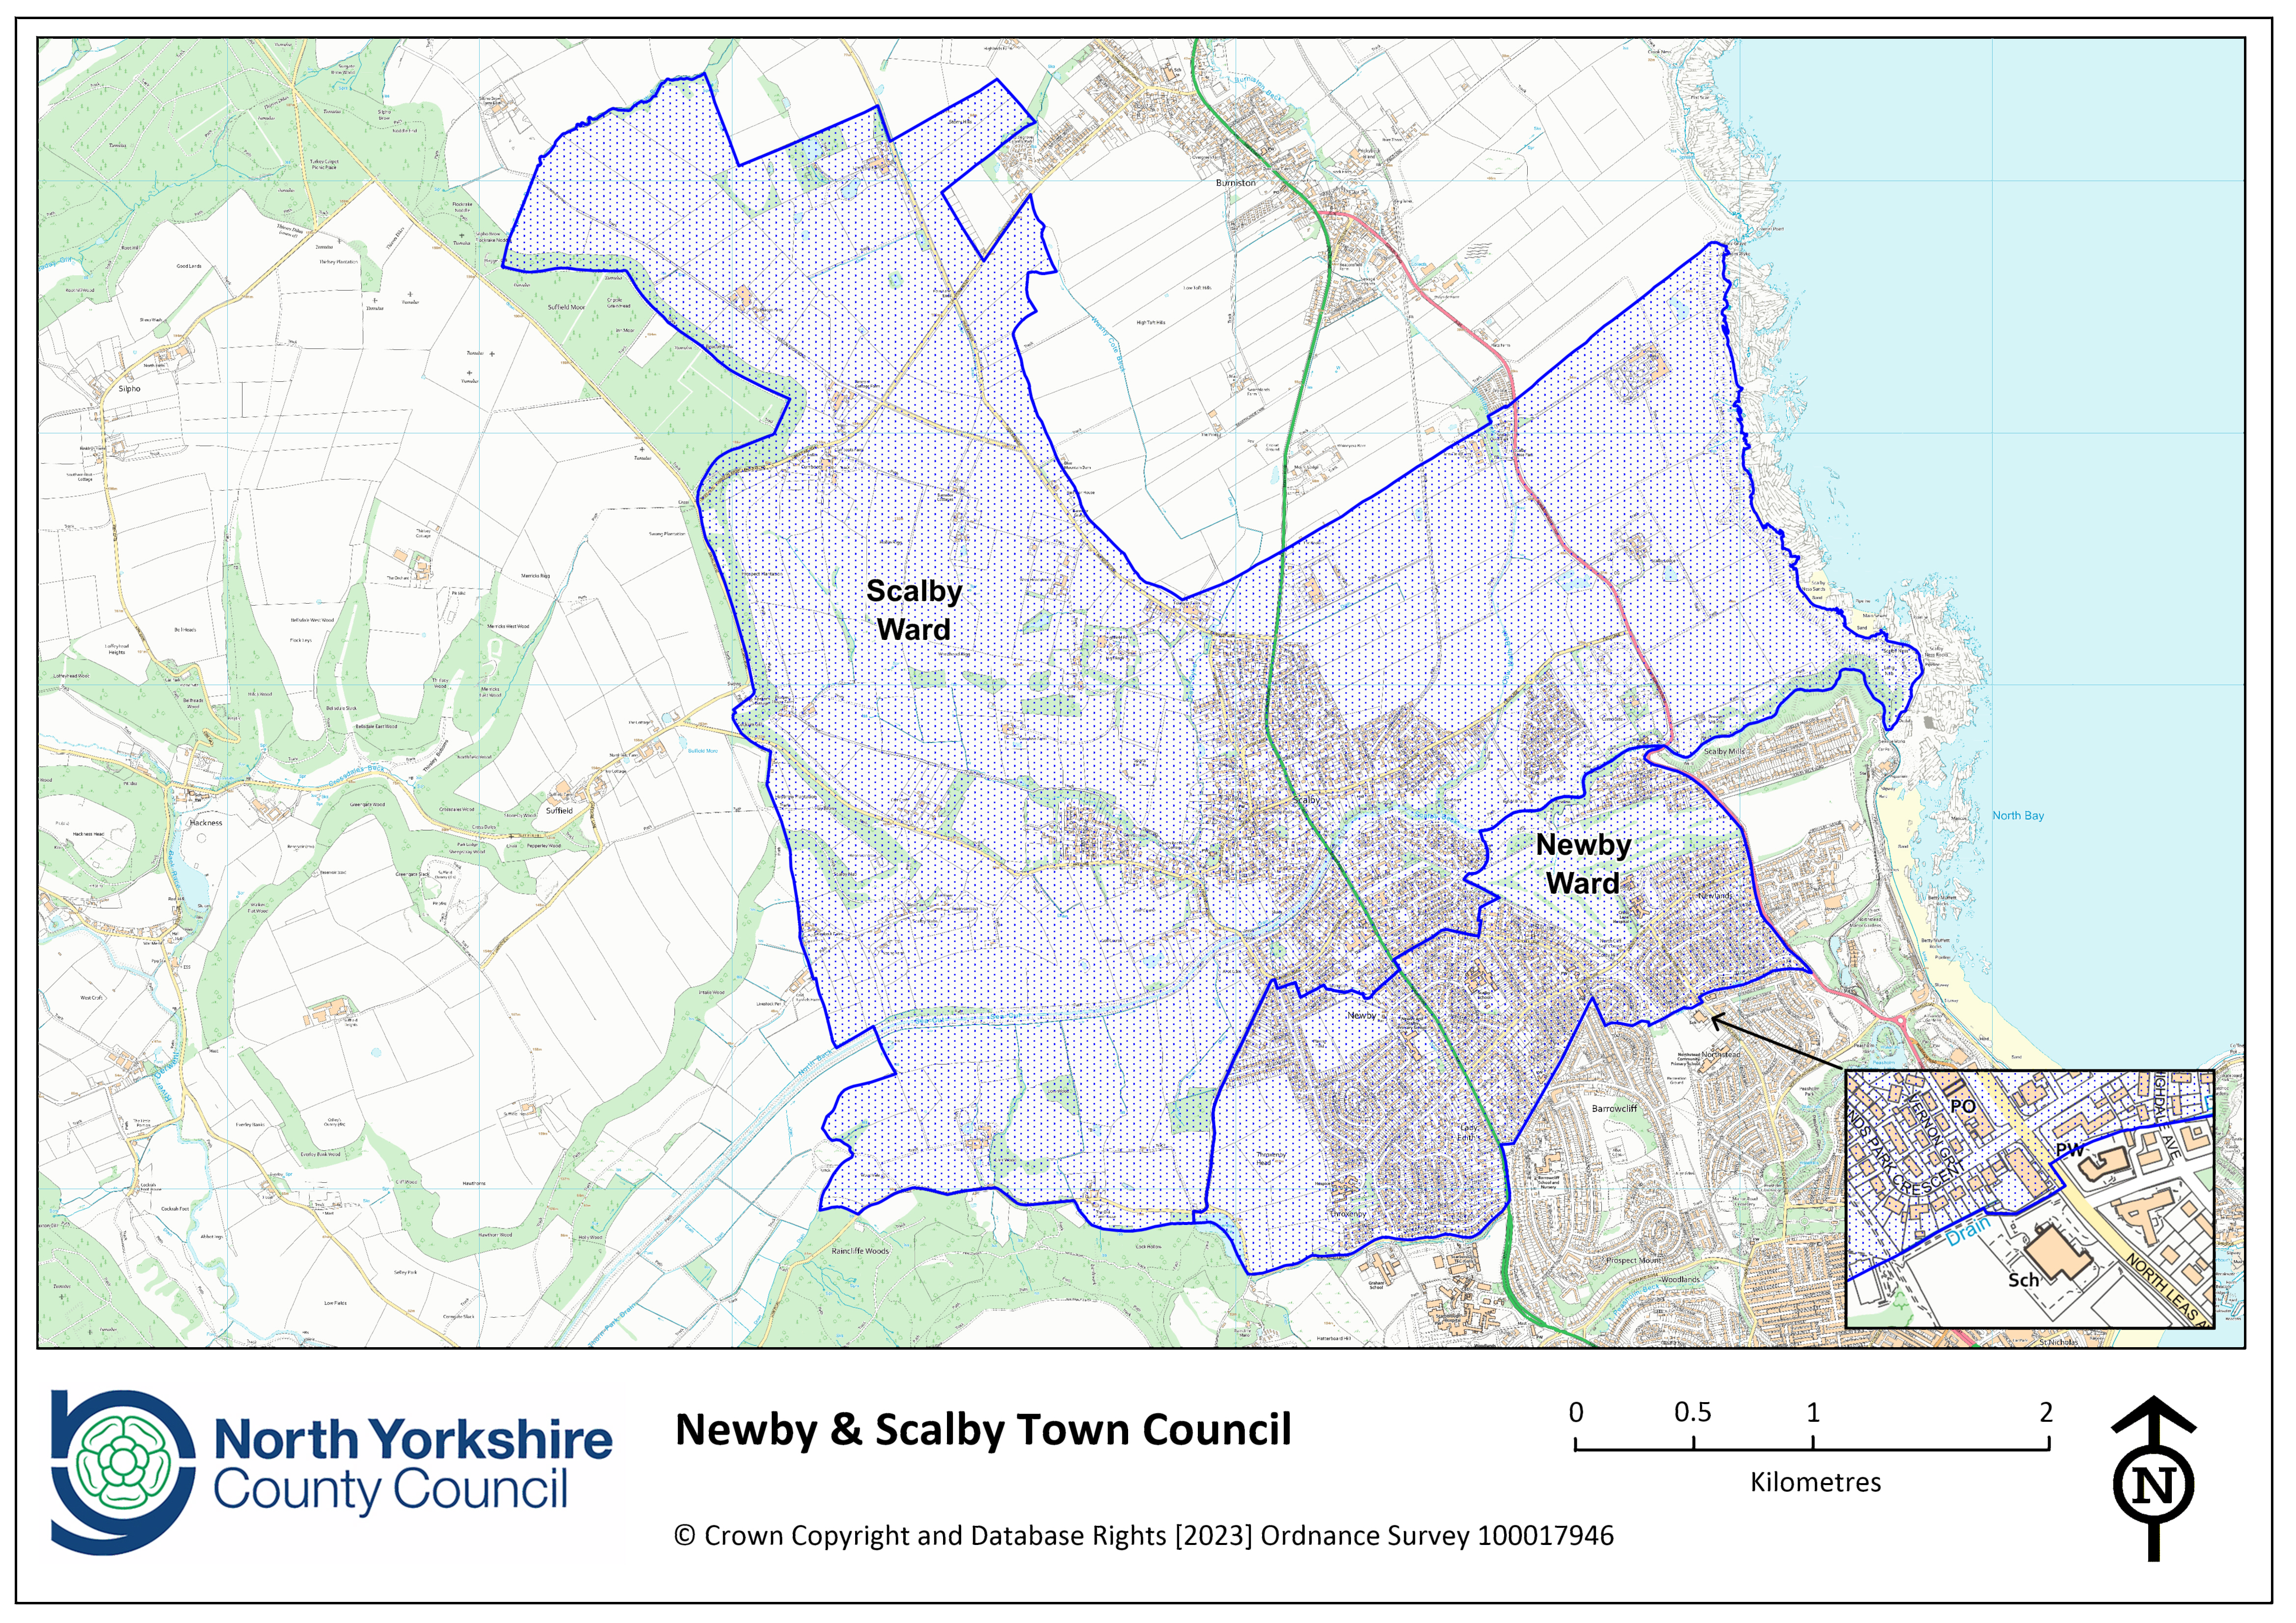 Newby and Scalby town council boundary map